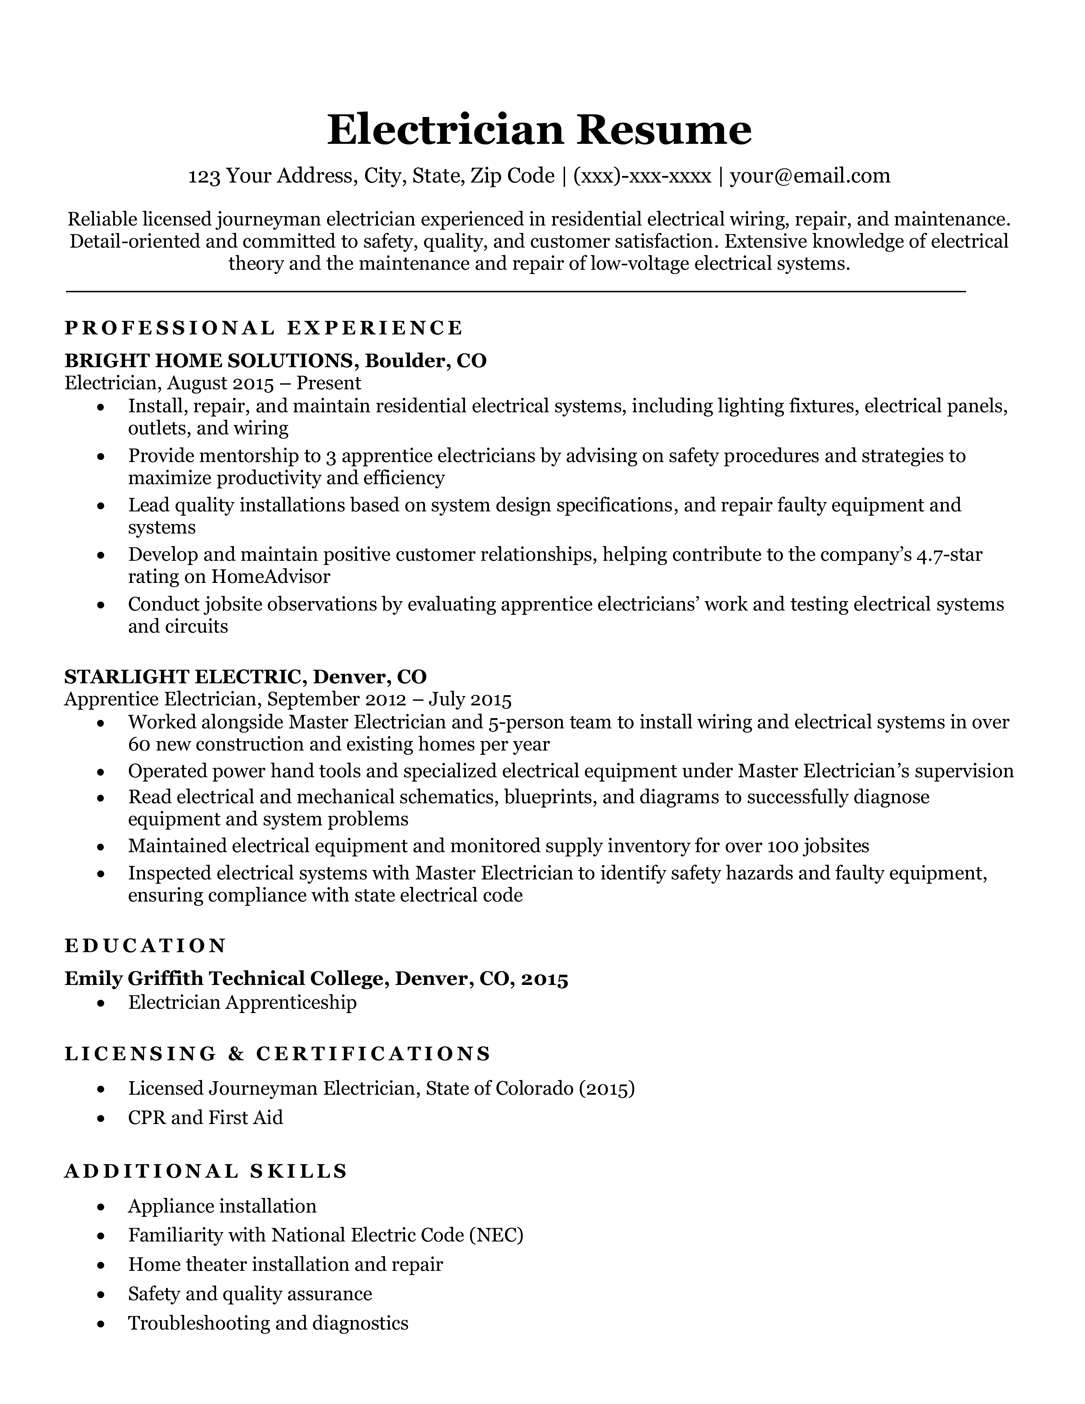 sample of electrical resume template